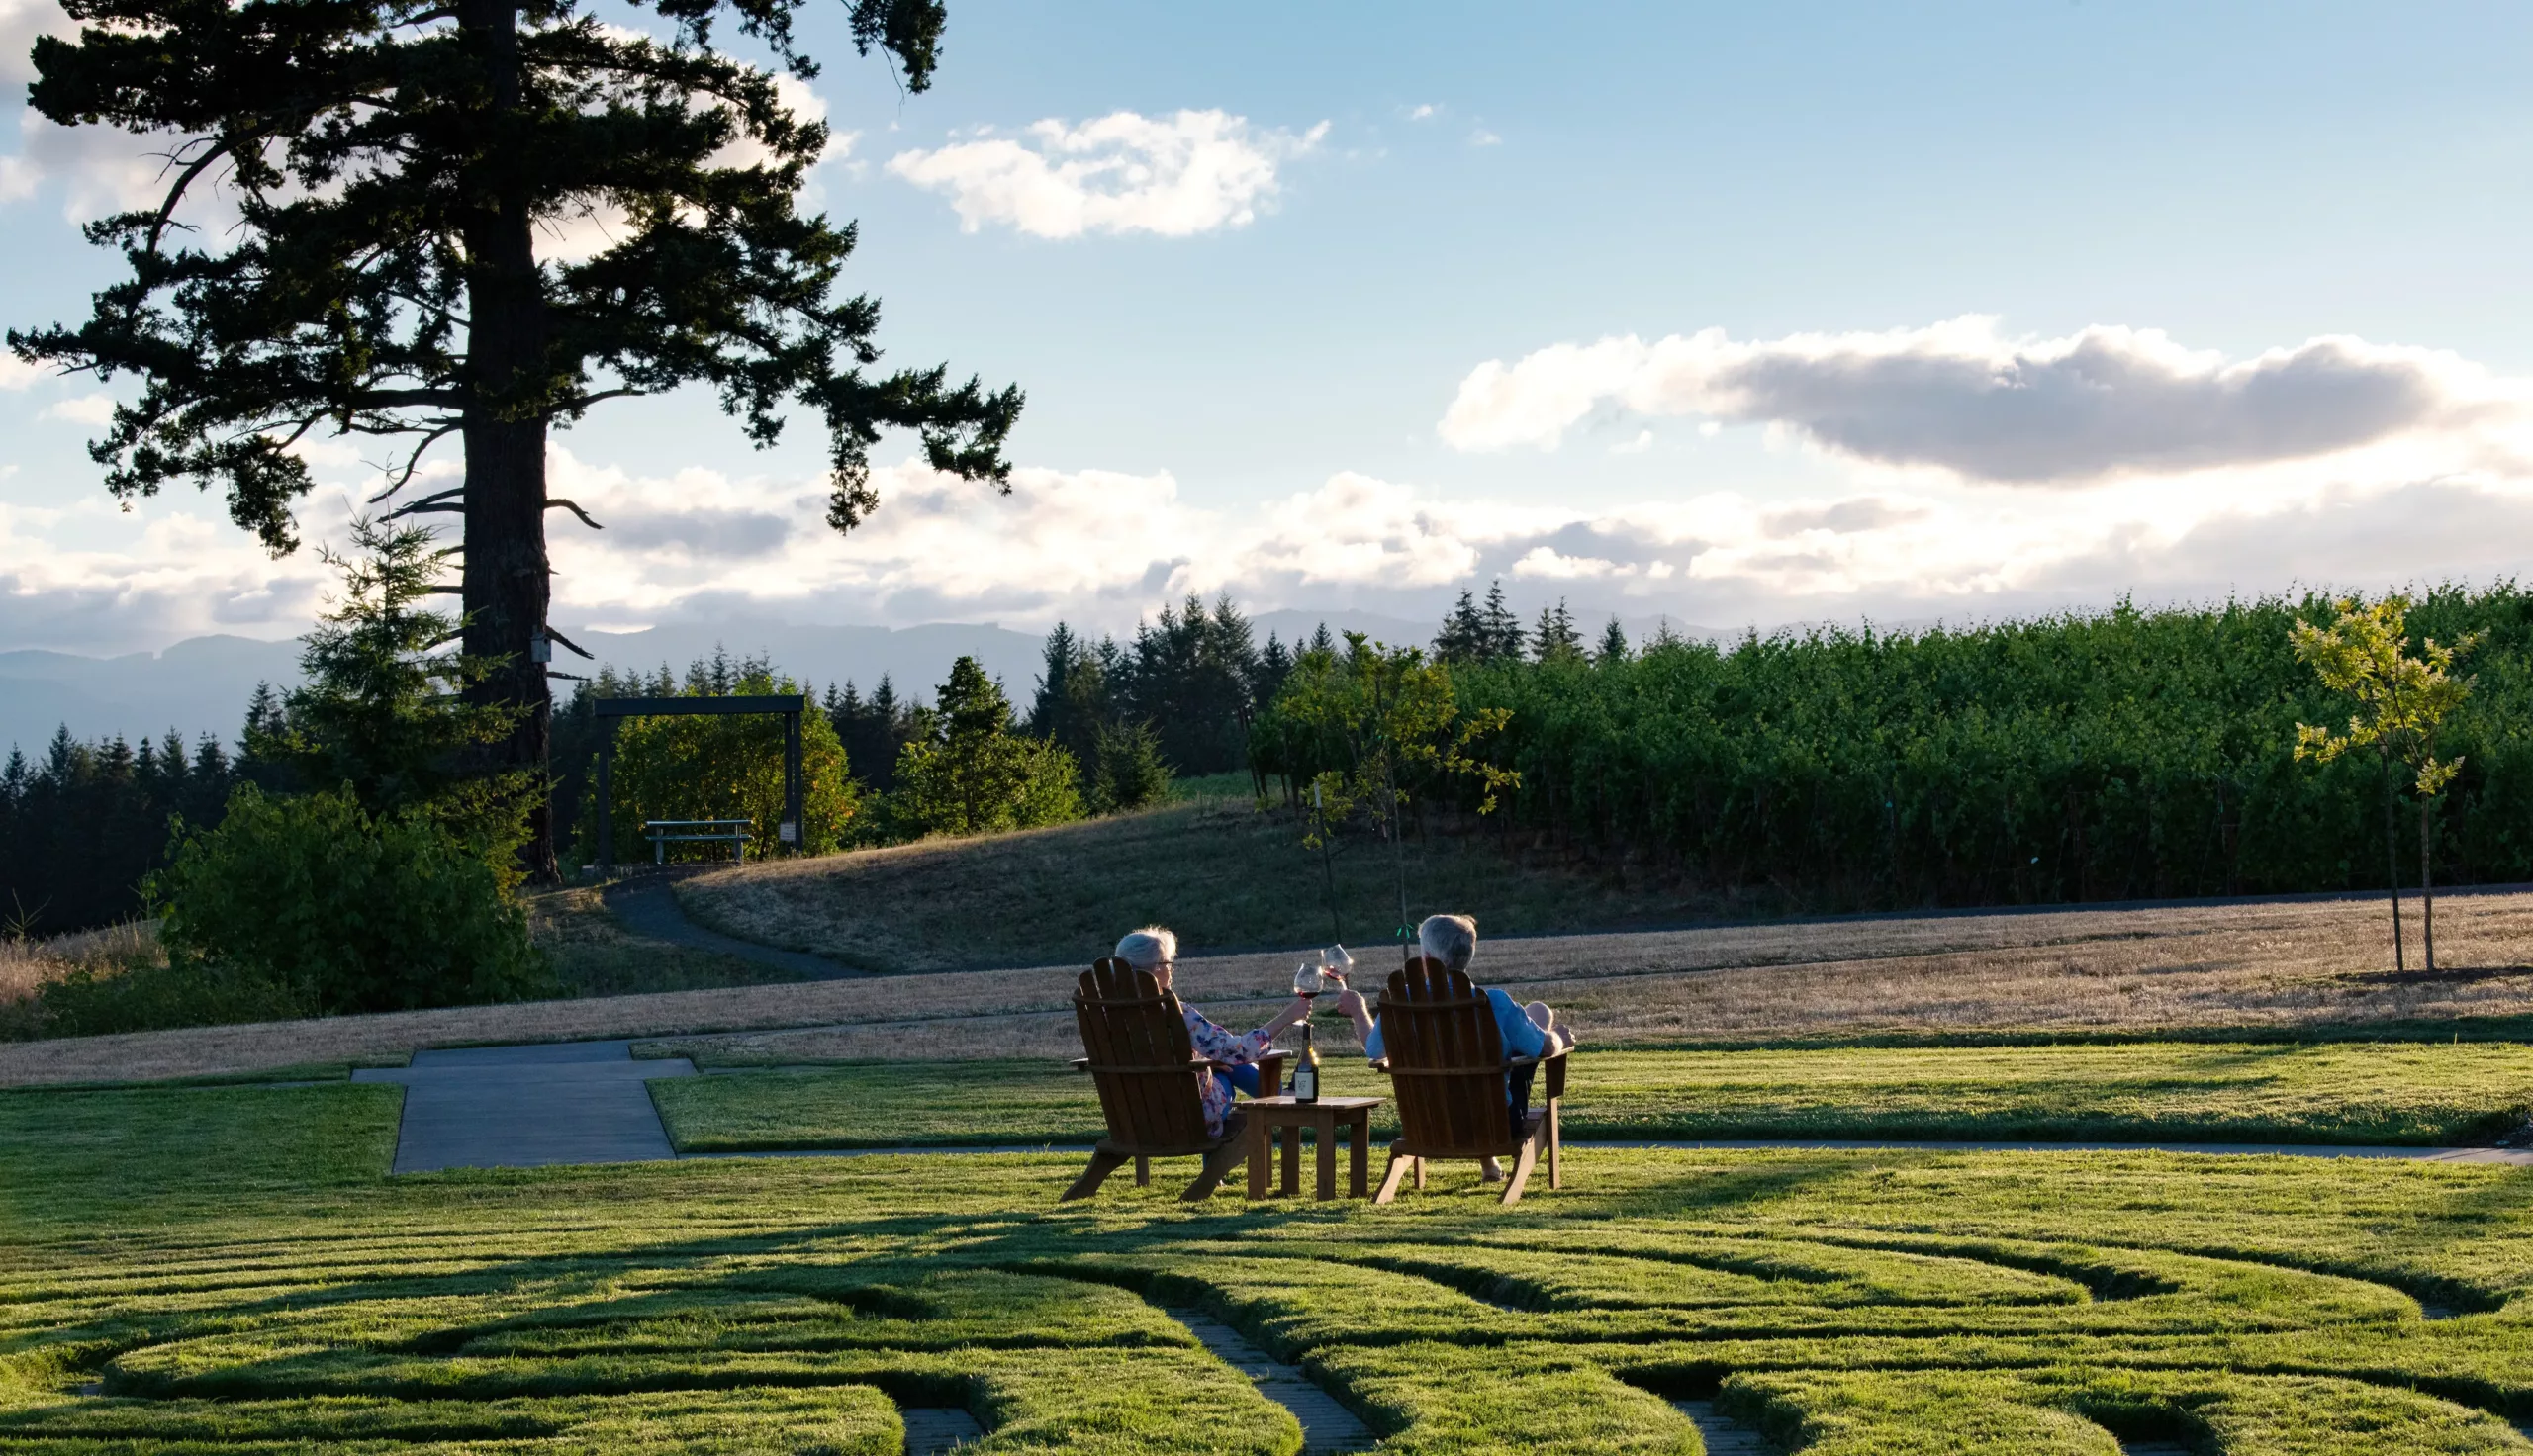 Two people sitting in lawn chairs on a green lawn clink wine glasses while taking in the sunset beneath an old-growth Douglas fir tree at Fairsing Vineyard in Oregon's Willamette Valley